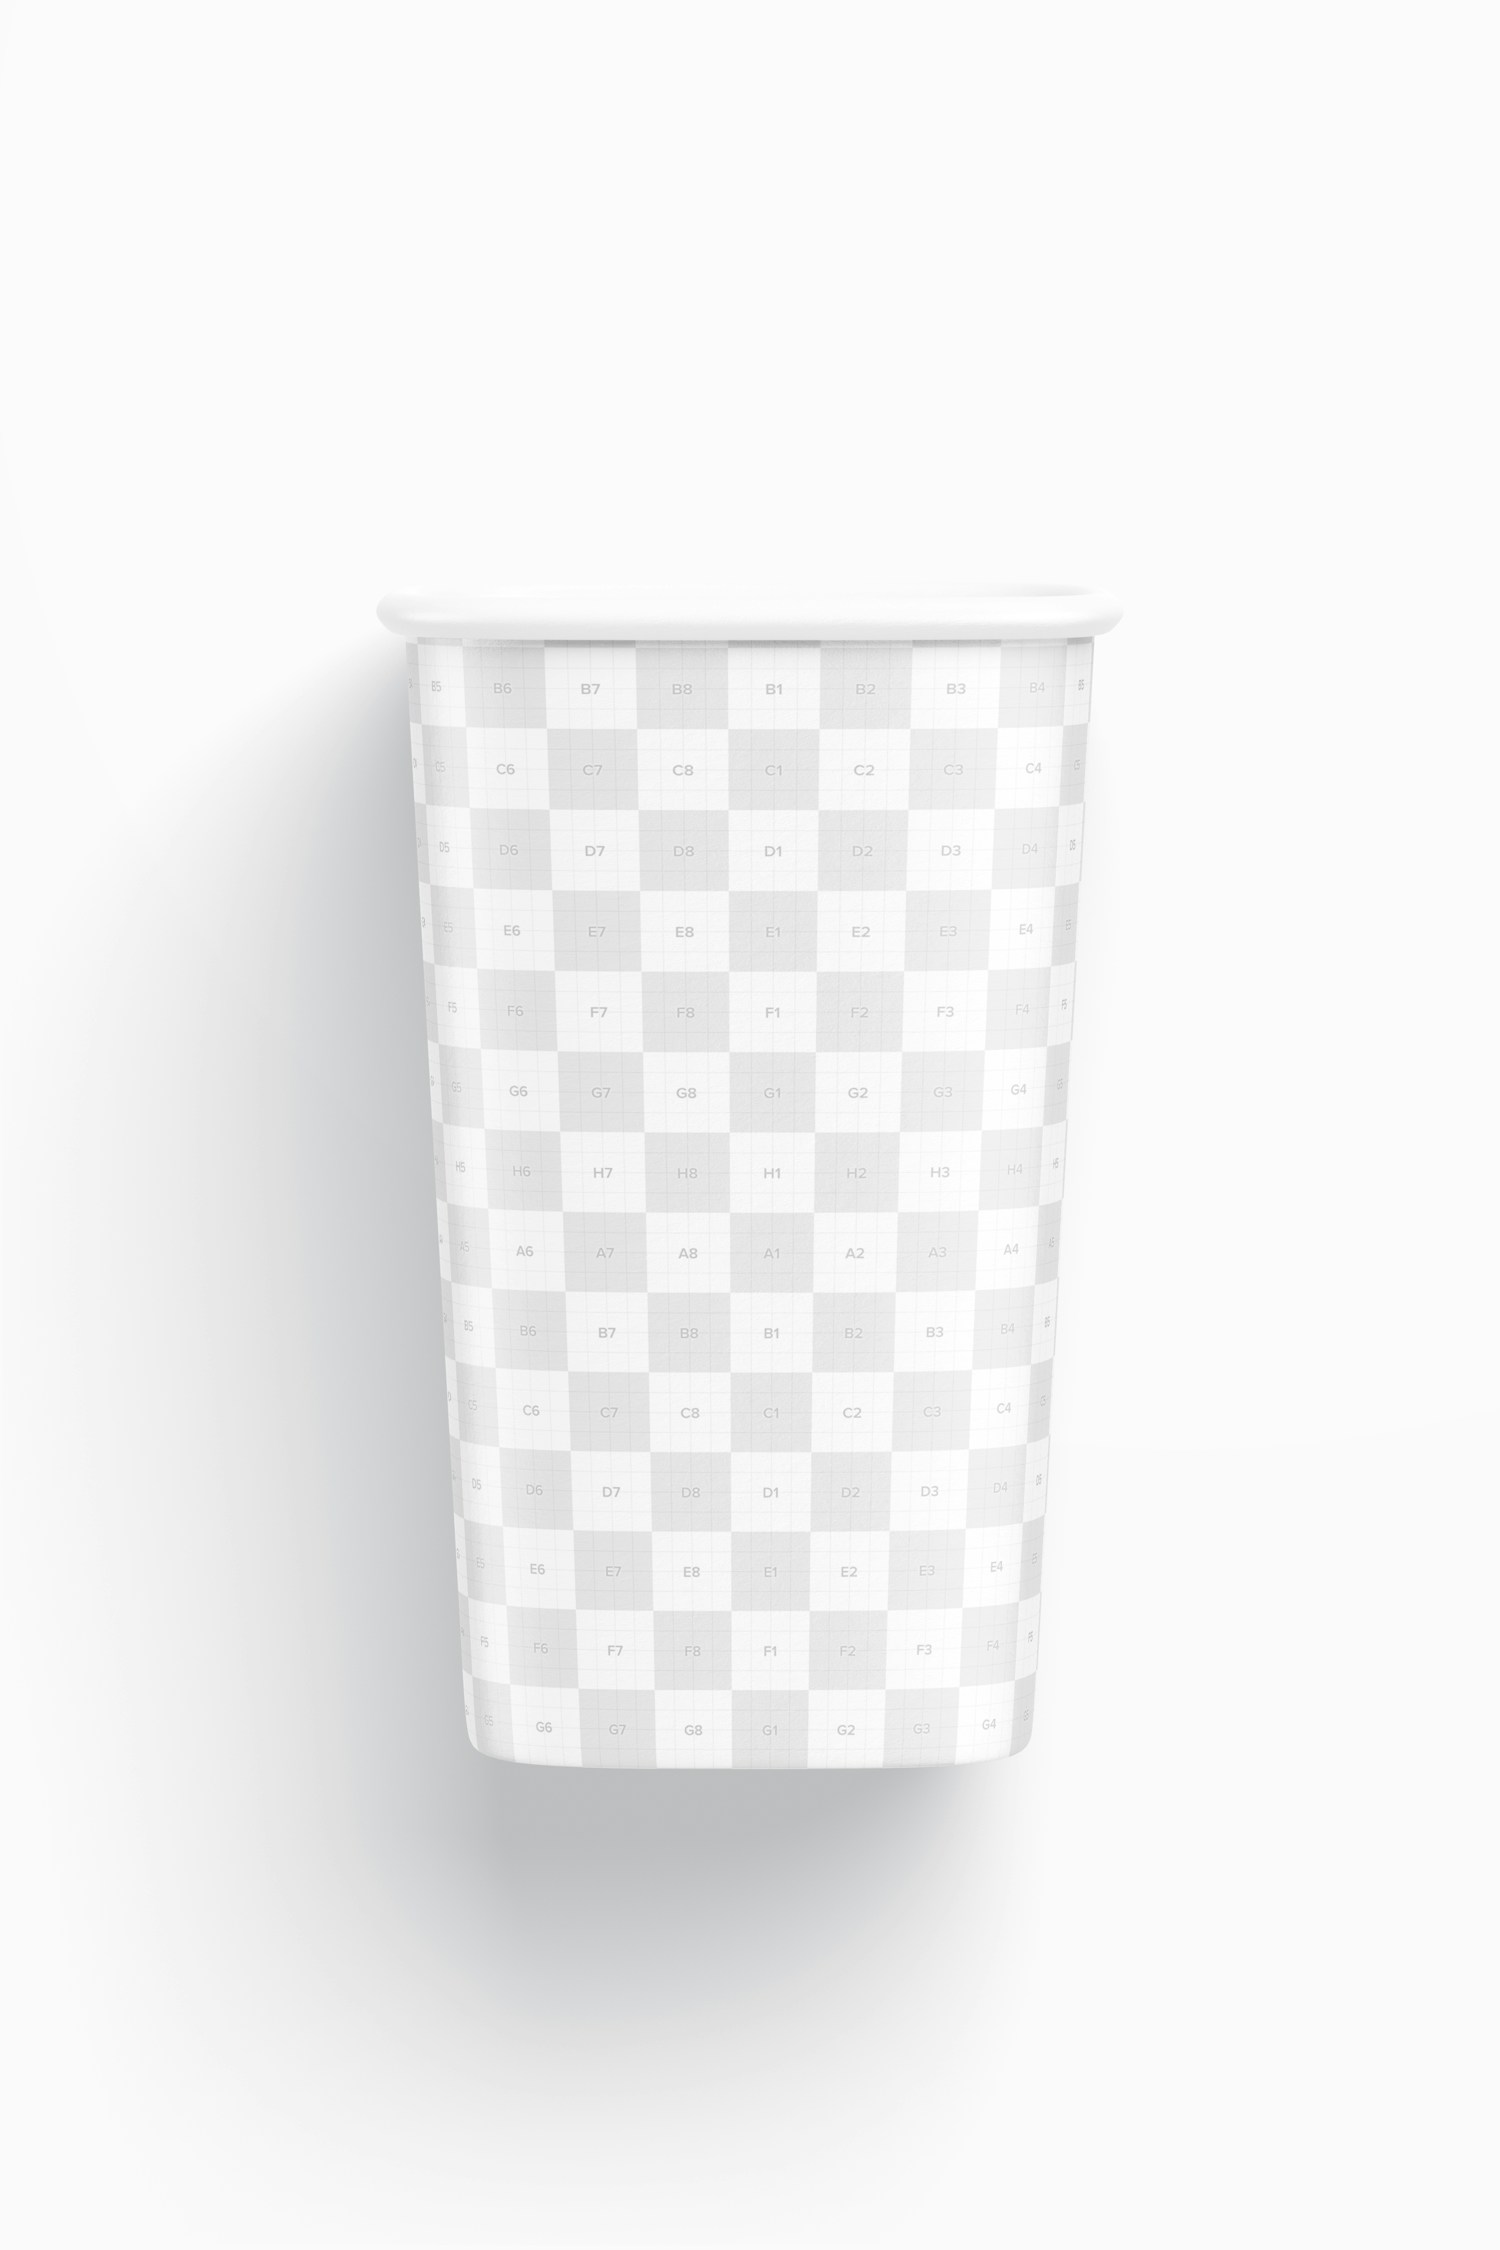 Square Paper Cup Mockup, Top View